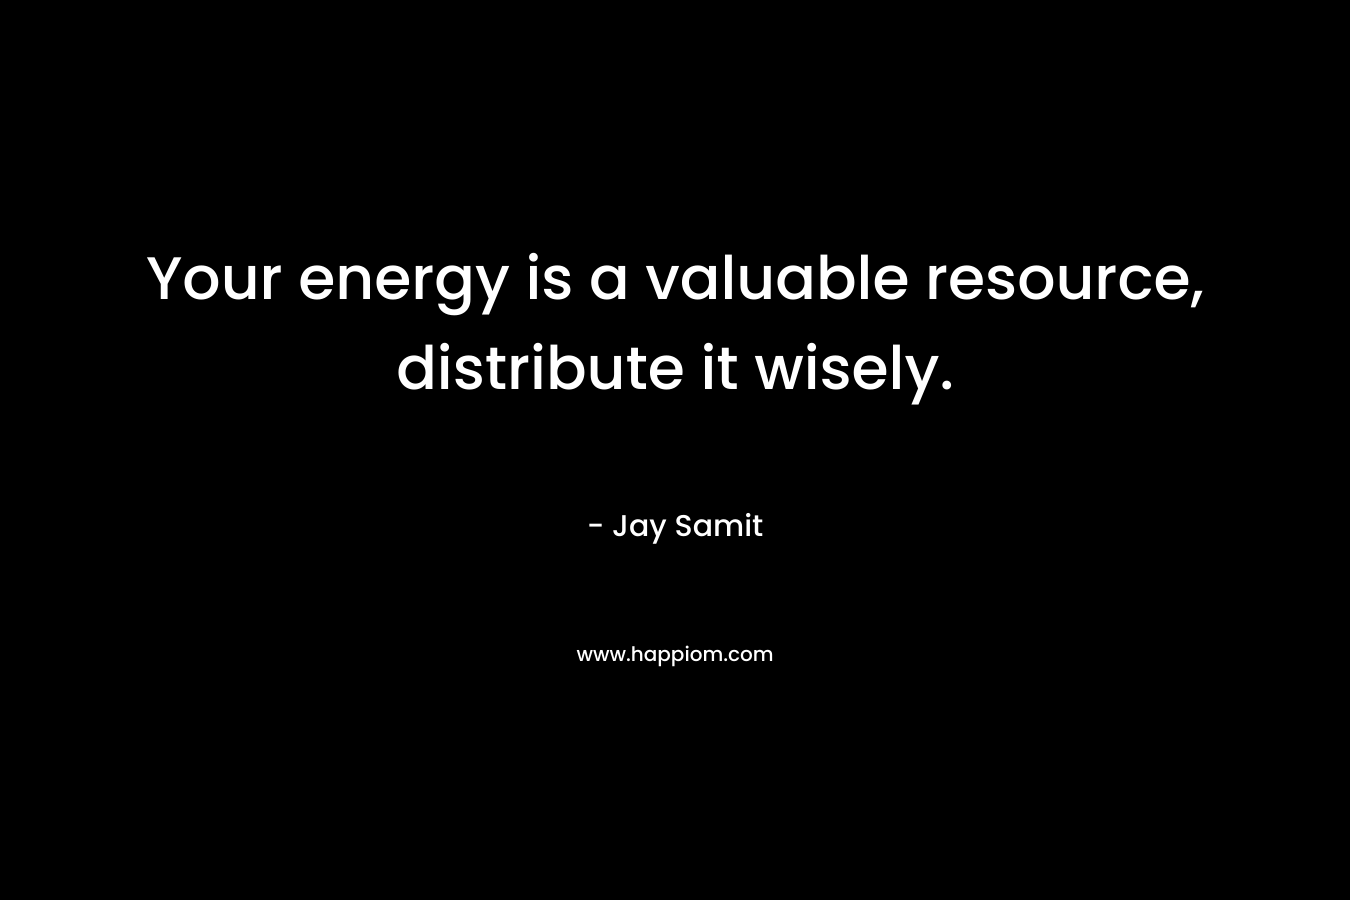 Your energy is a valuable resource, distribute it wisely.